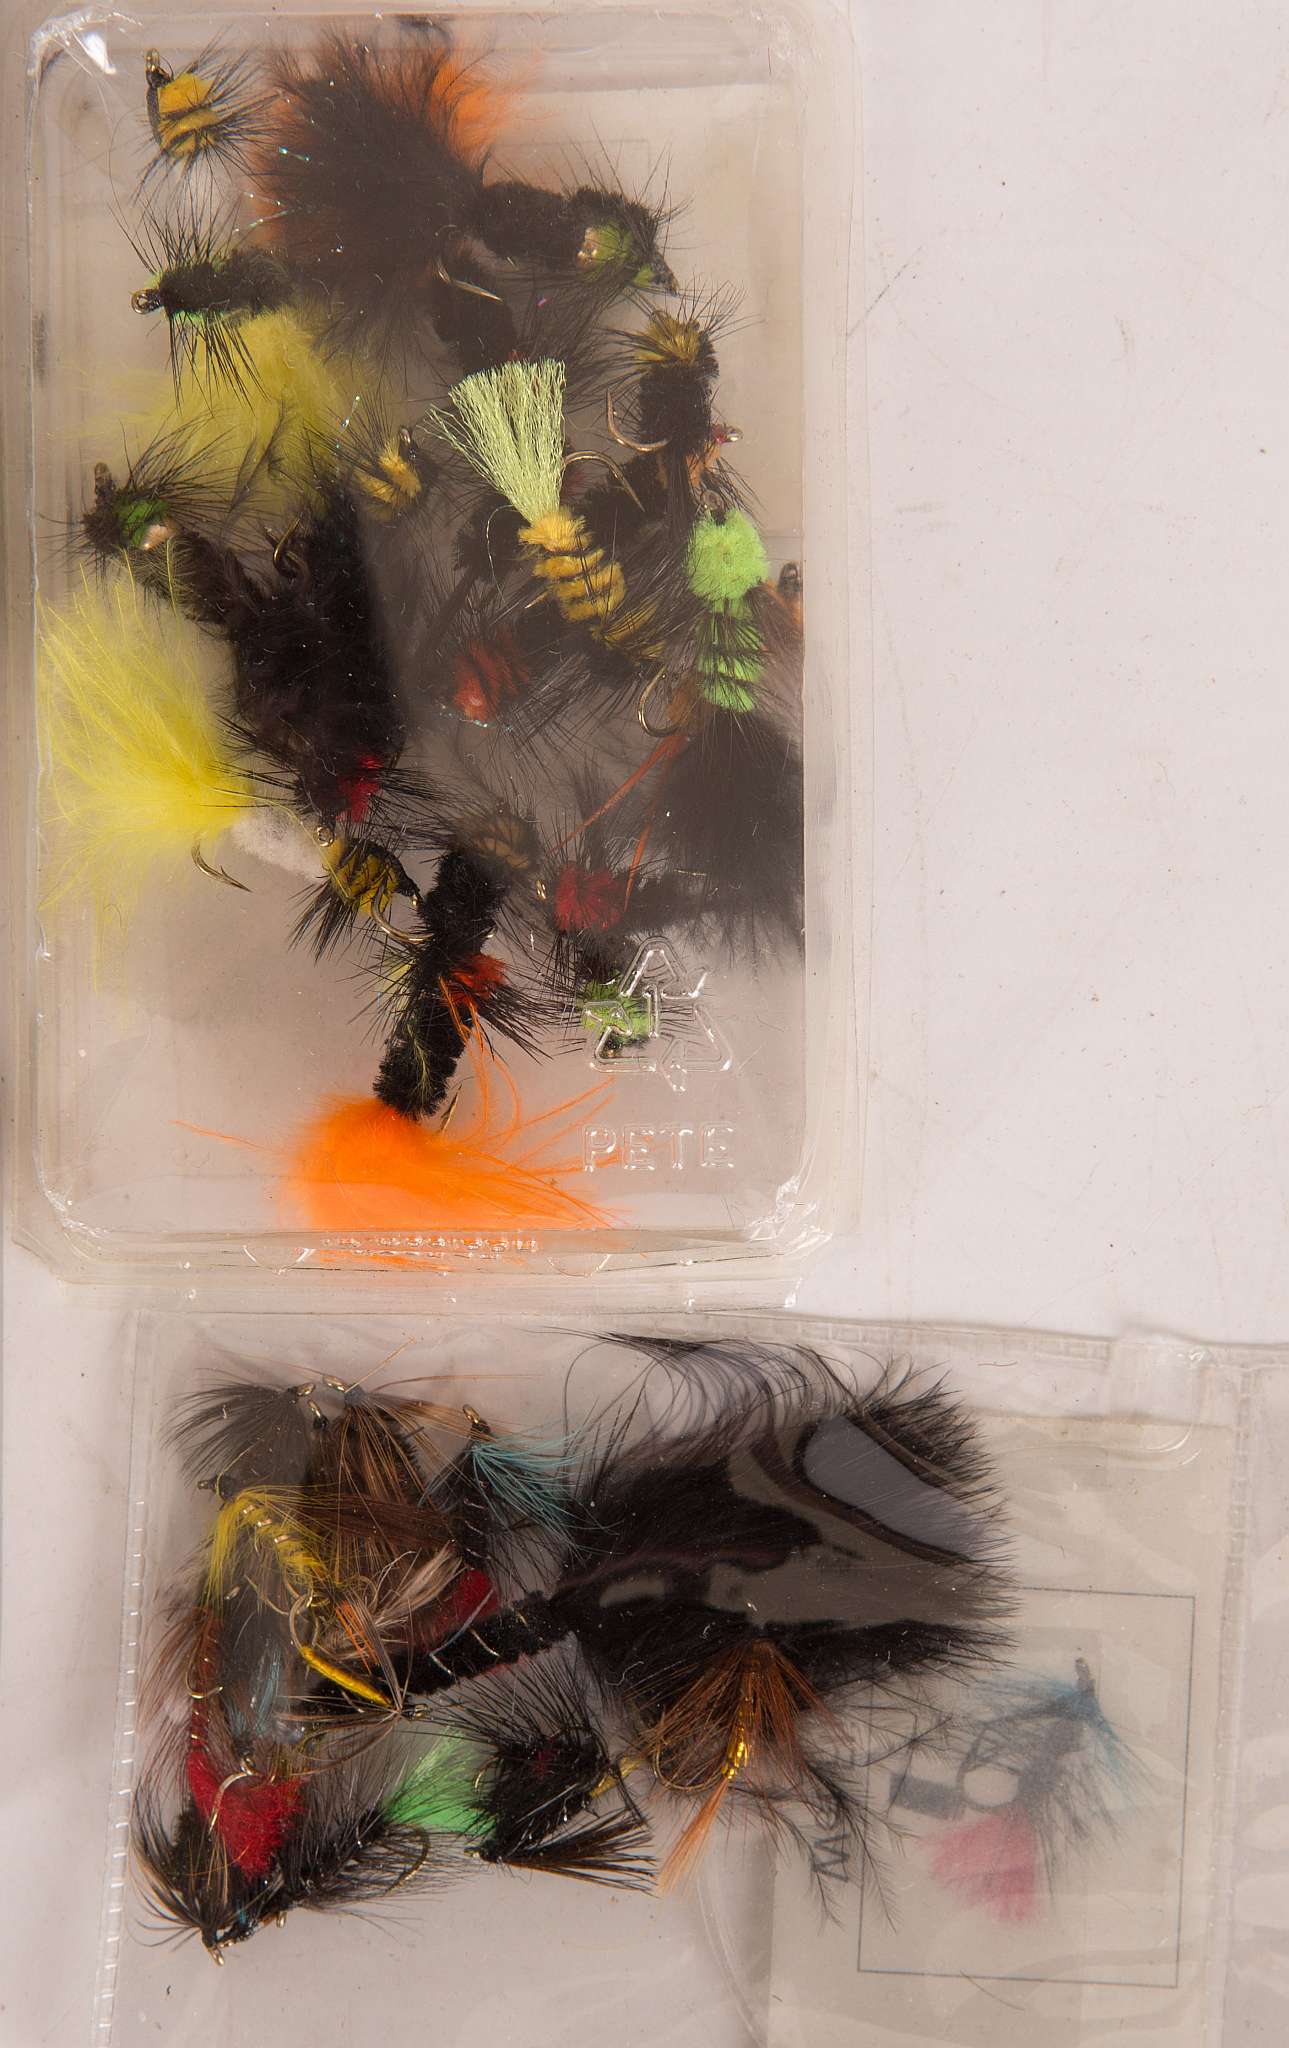 A Wheatley 'Silmalloy' fly box and collection of approx. 100 good, wet and dry flies, sold - Image 5 of 6